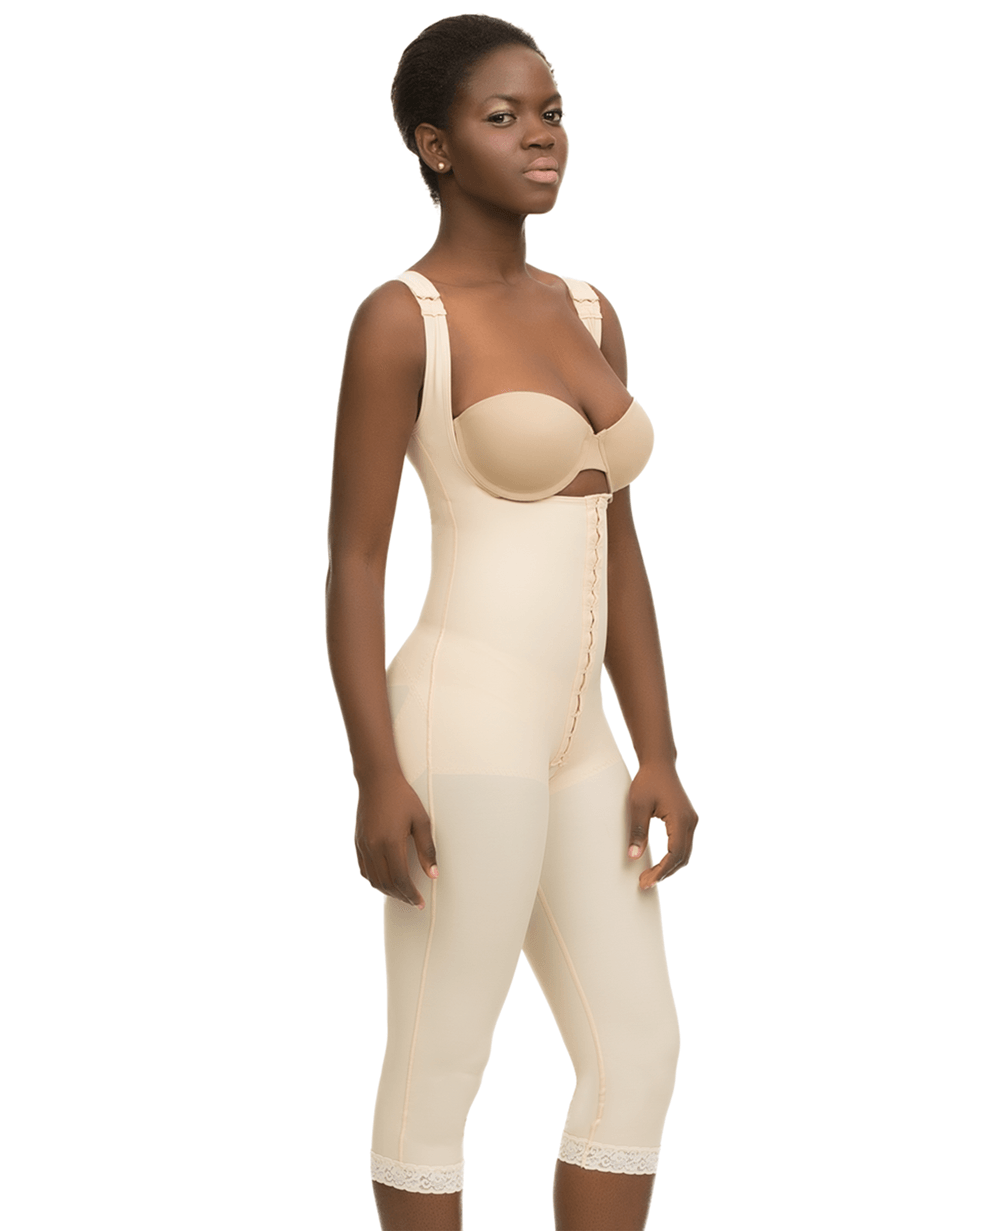 Isavela Comprexxwear Closed High Back Compression Body Suit Above